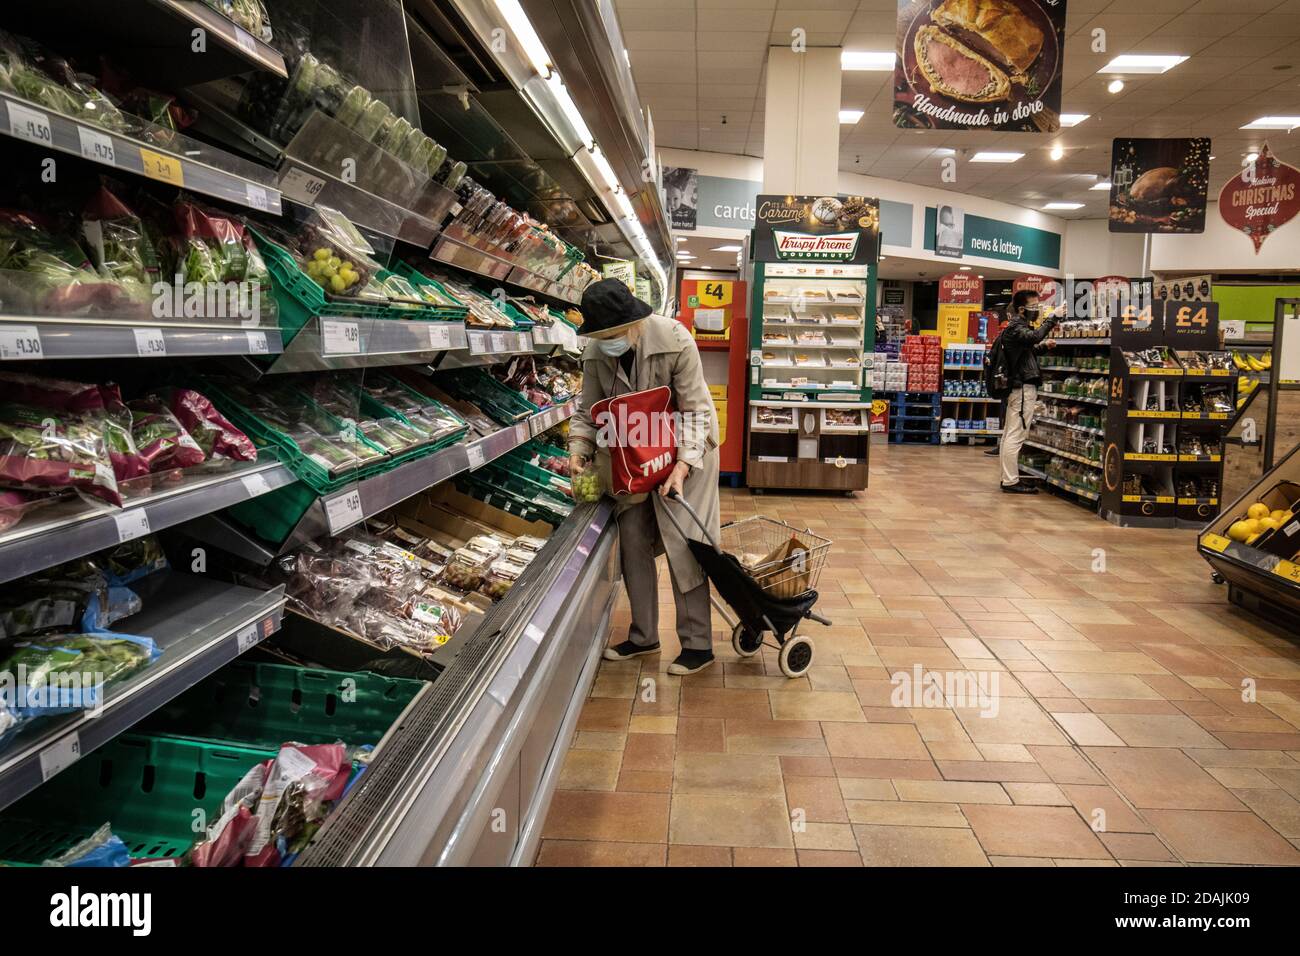 Grocery shopping in Morrisons, London, England, United Kingdom Stock Photo